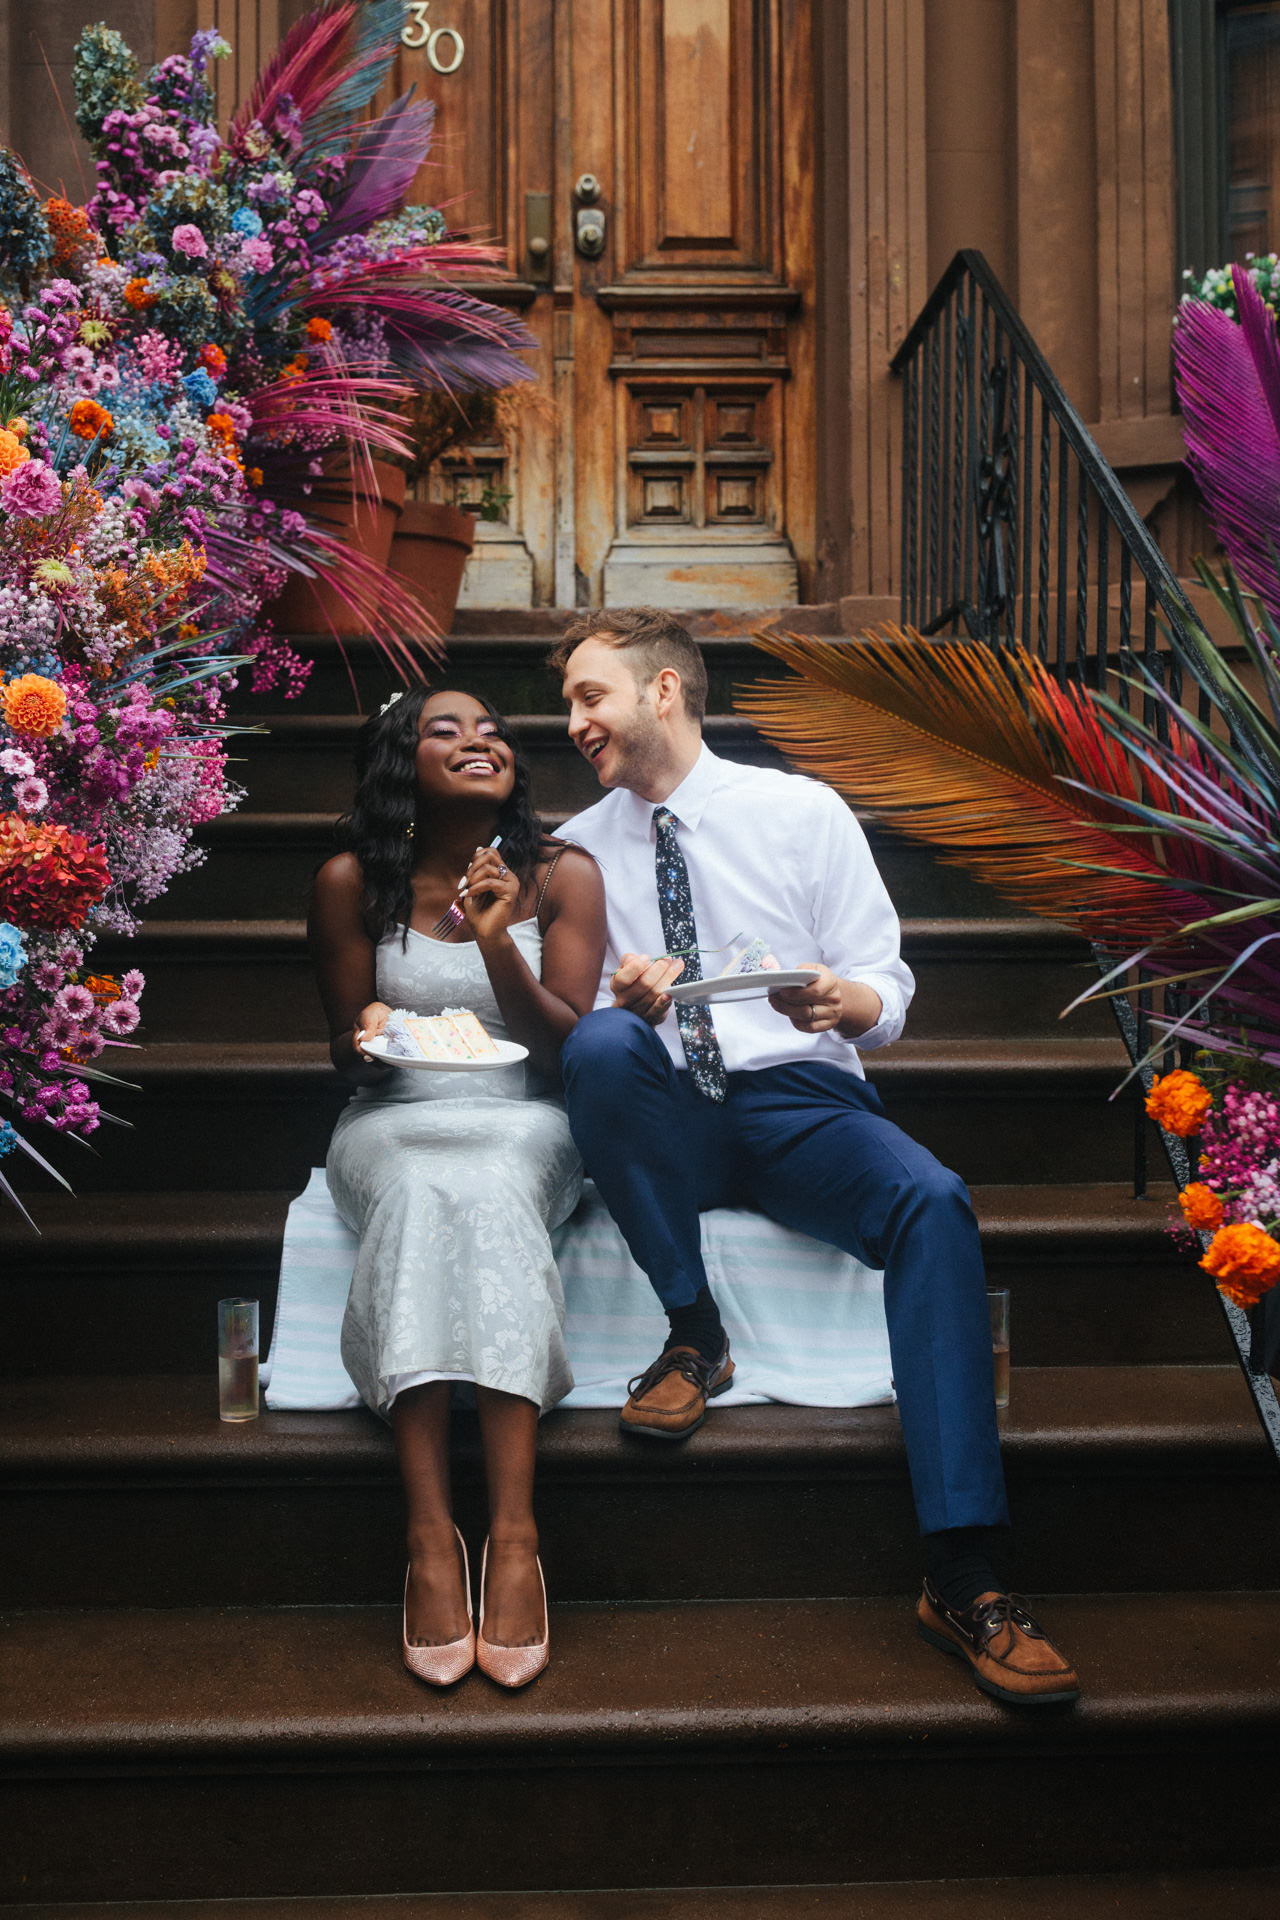 Elopements and City Hall - Sylvie Rosokoff | NYC Photography ...